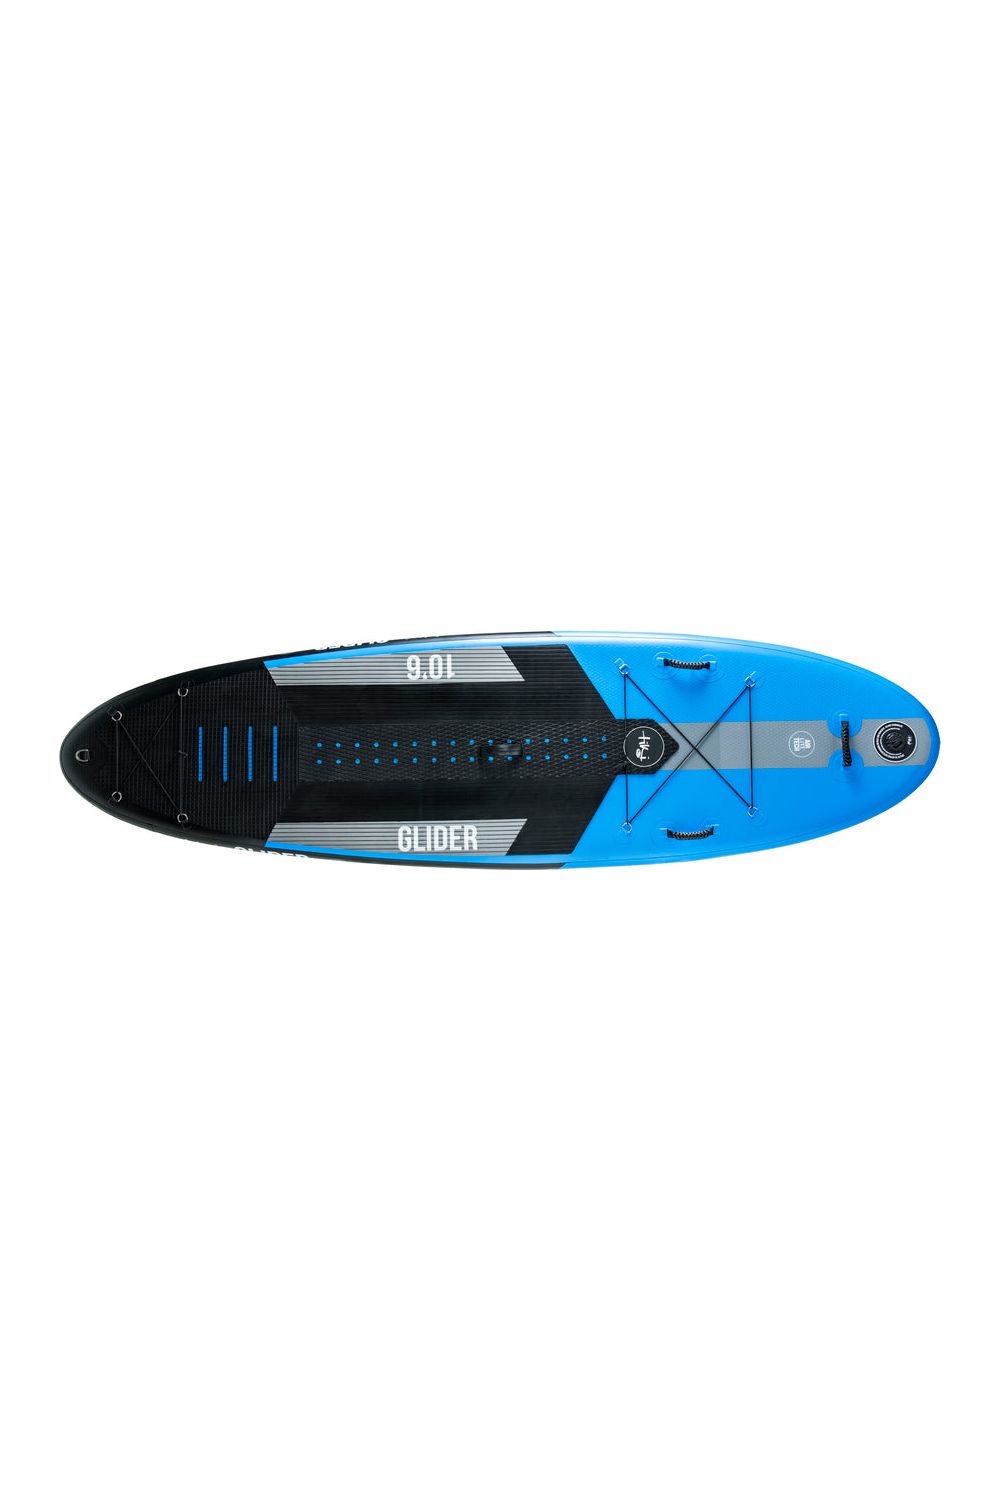 10'6 X 35" X 15Cm Tiki Glider Inflatable Sup (Incl Fin & Deck Pad)